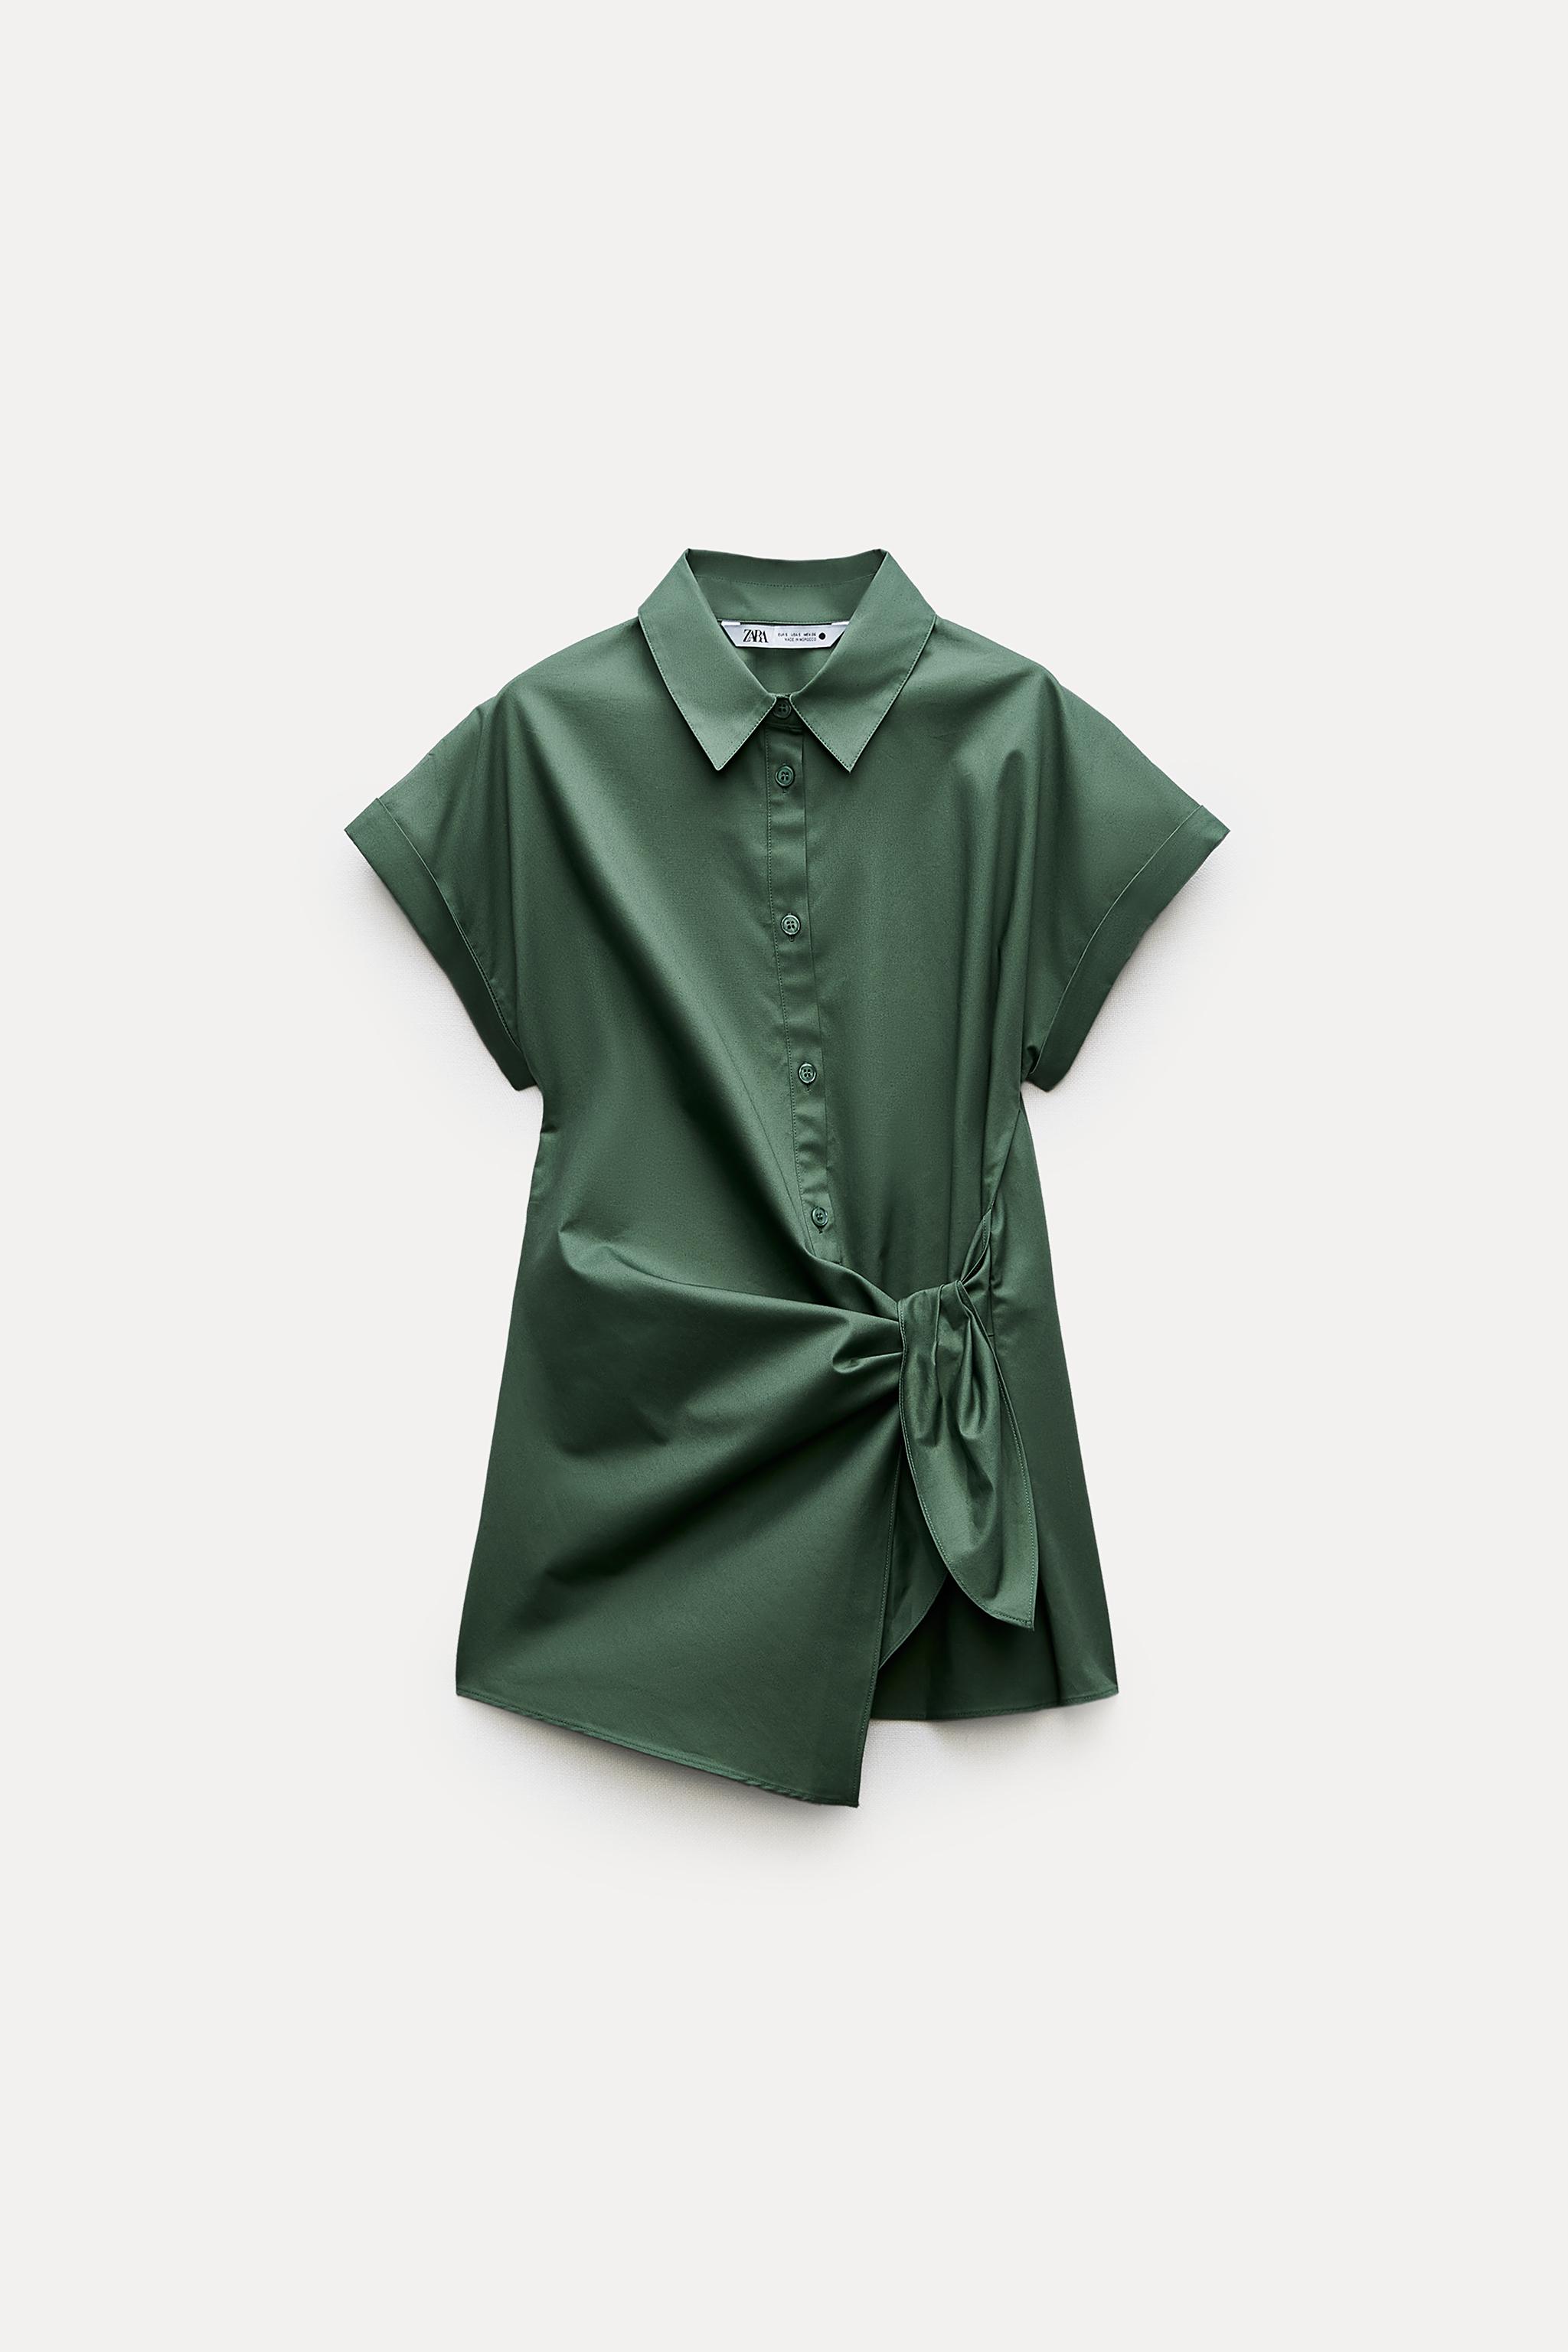 ZW COLLECTION KNOTTED POPLIN SHIRT - Green